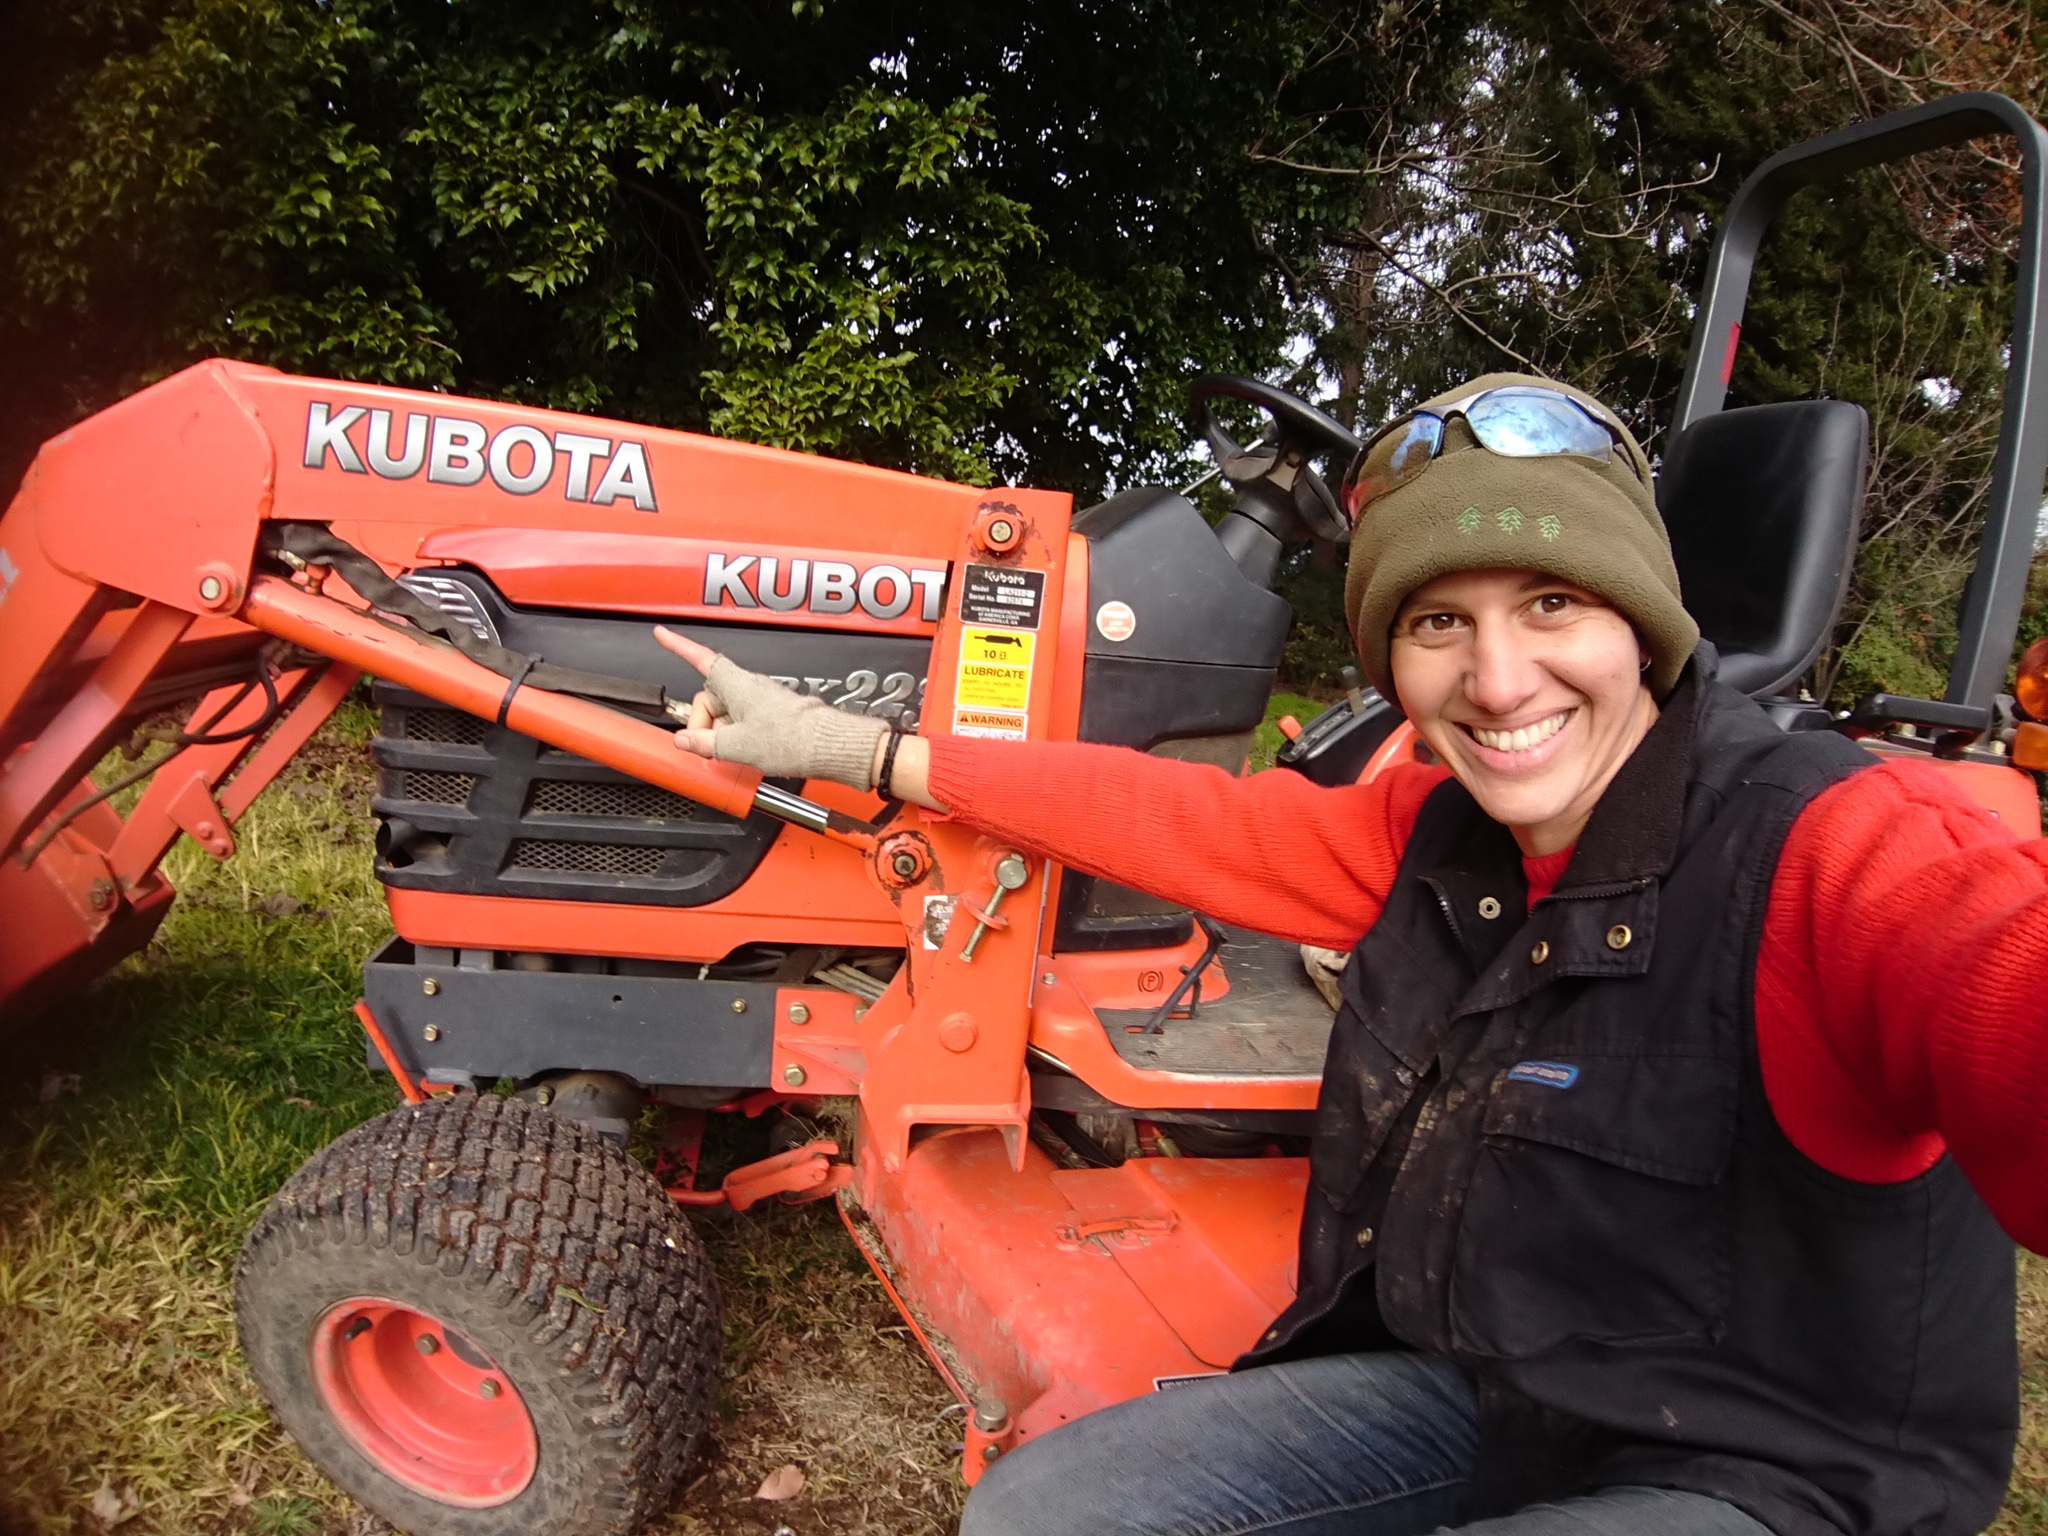 Gamila in front of a Kubota tractor